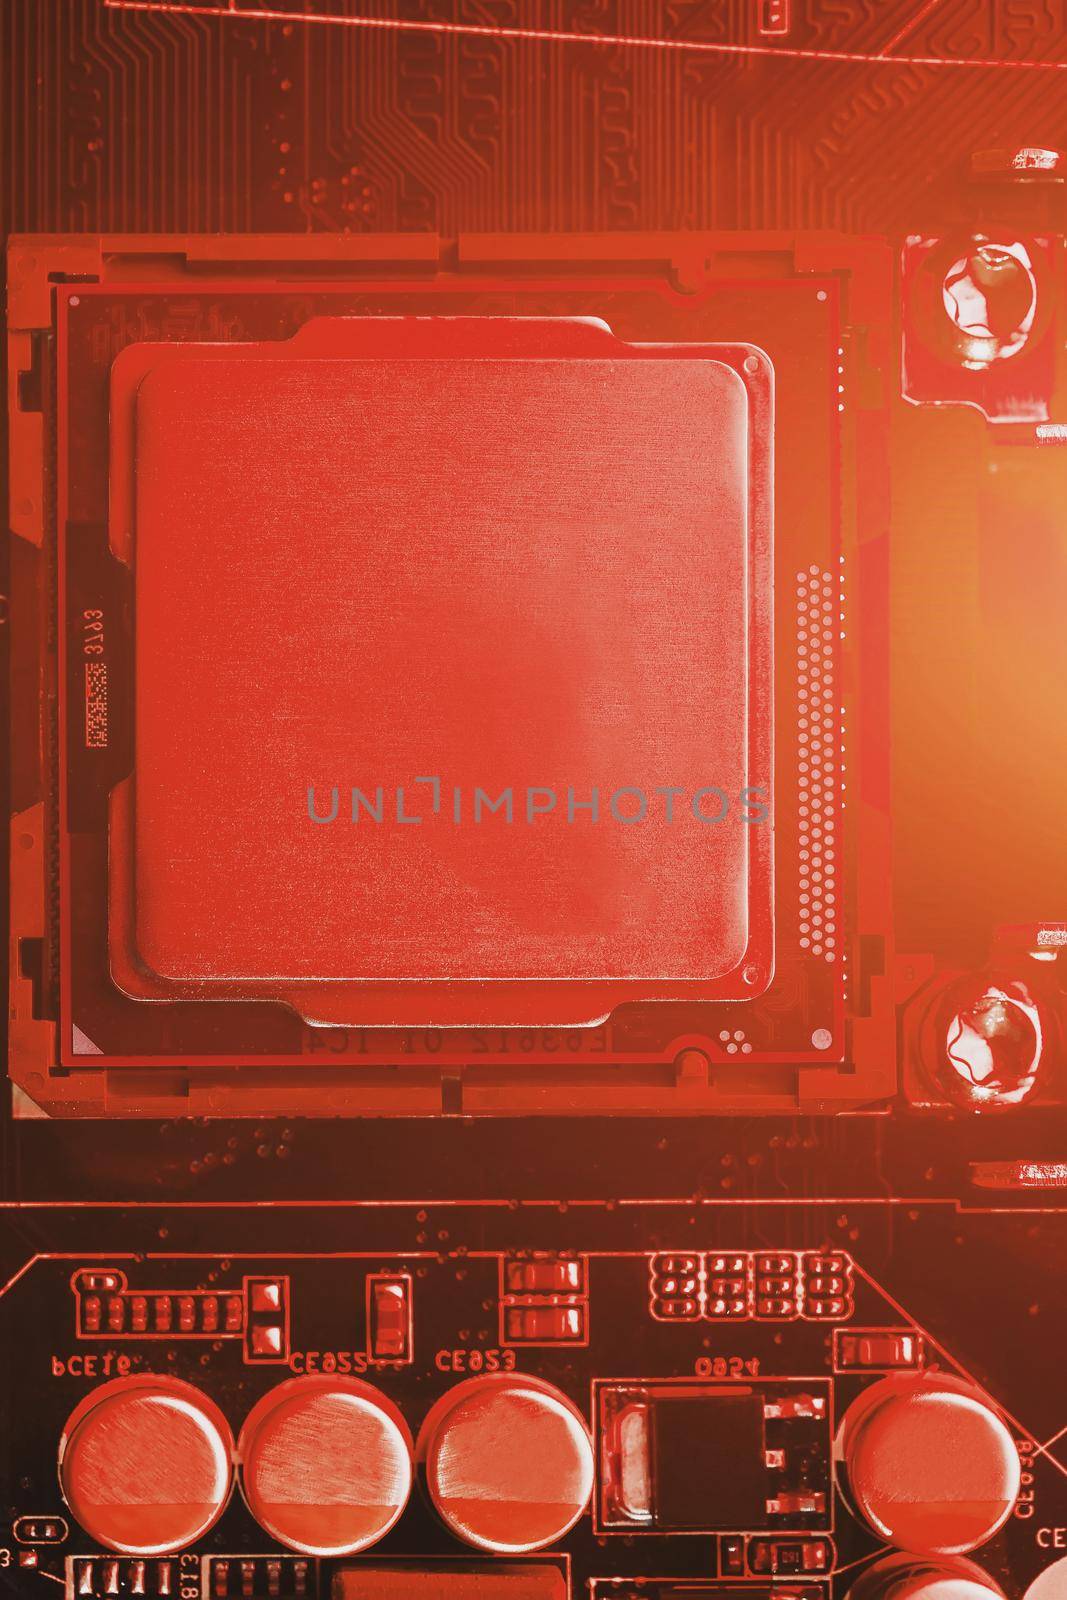 The central processor on the computer motherboard in red colors. PC repair, technician and industry support concept.